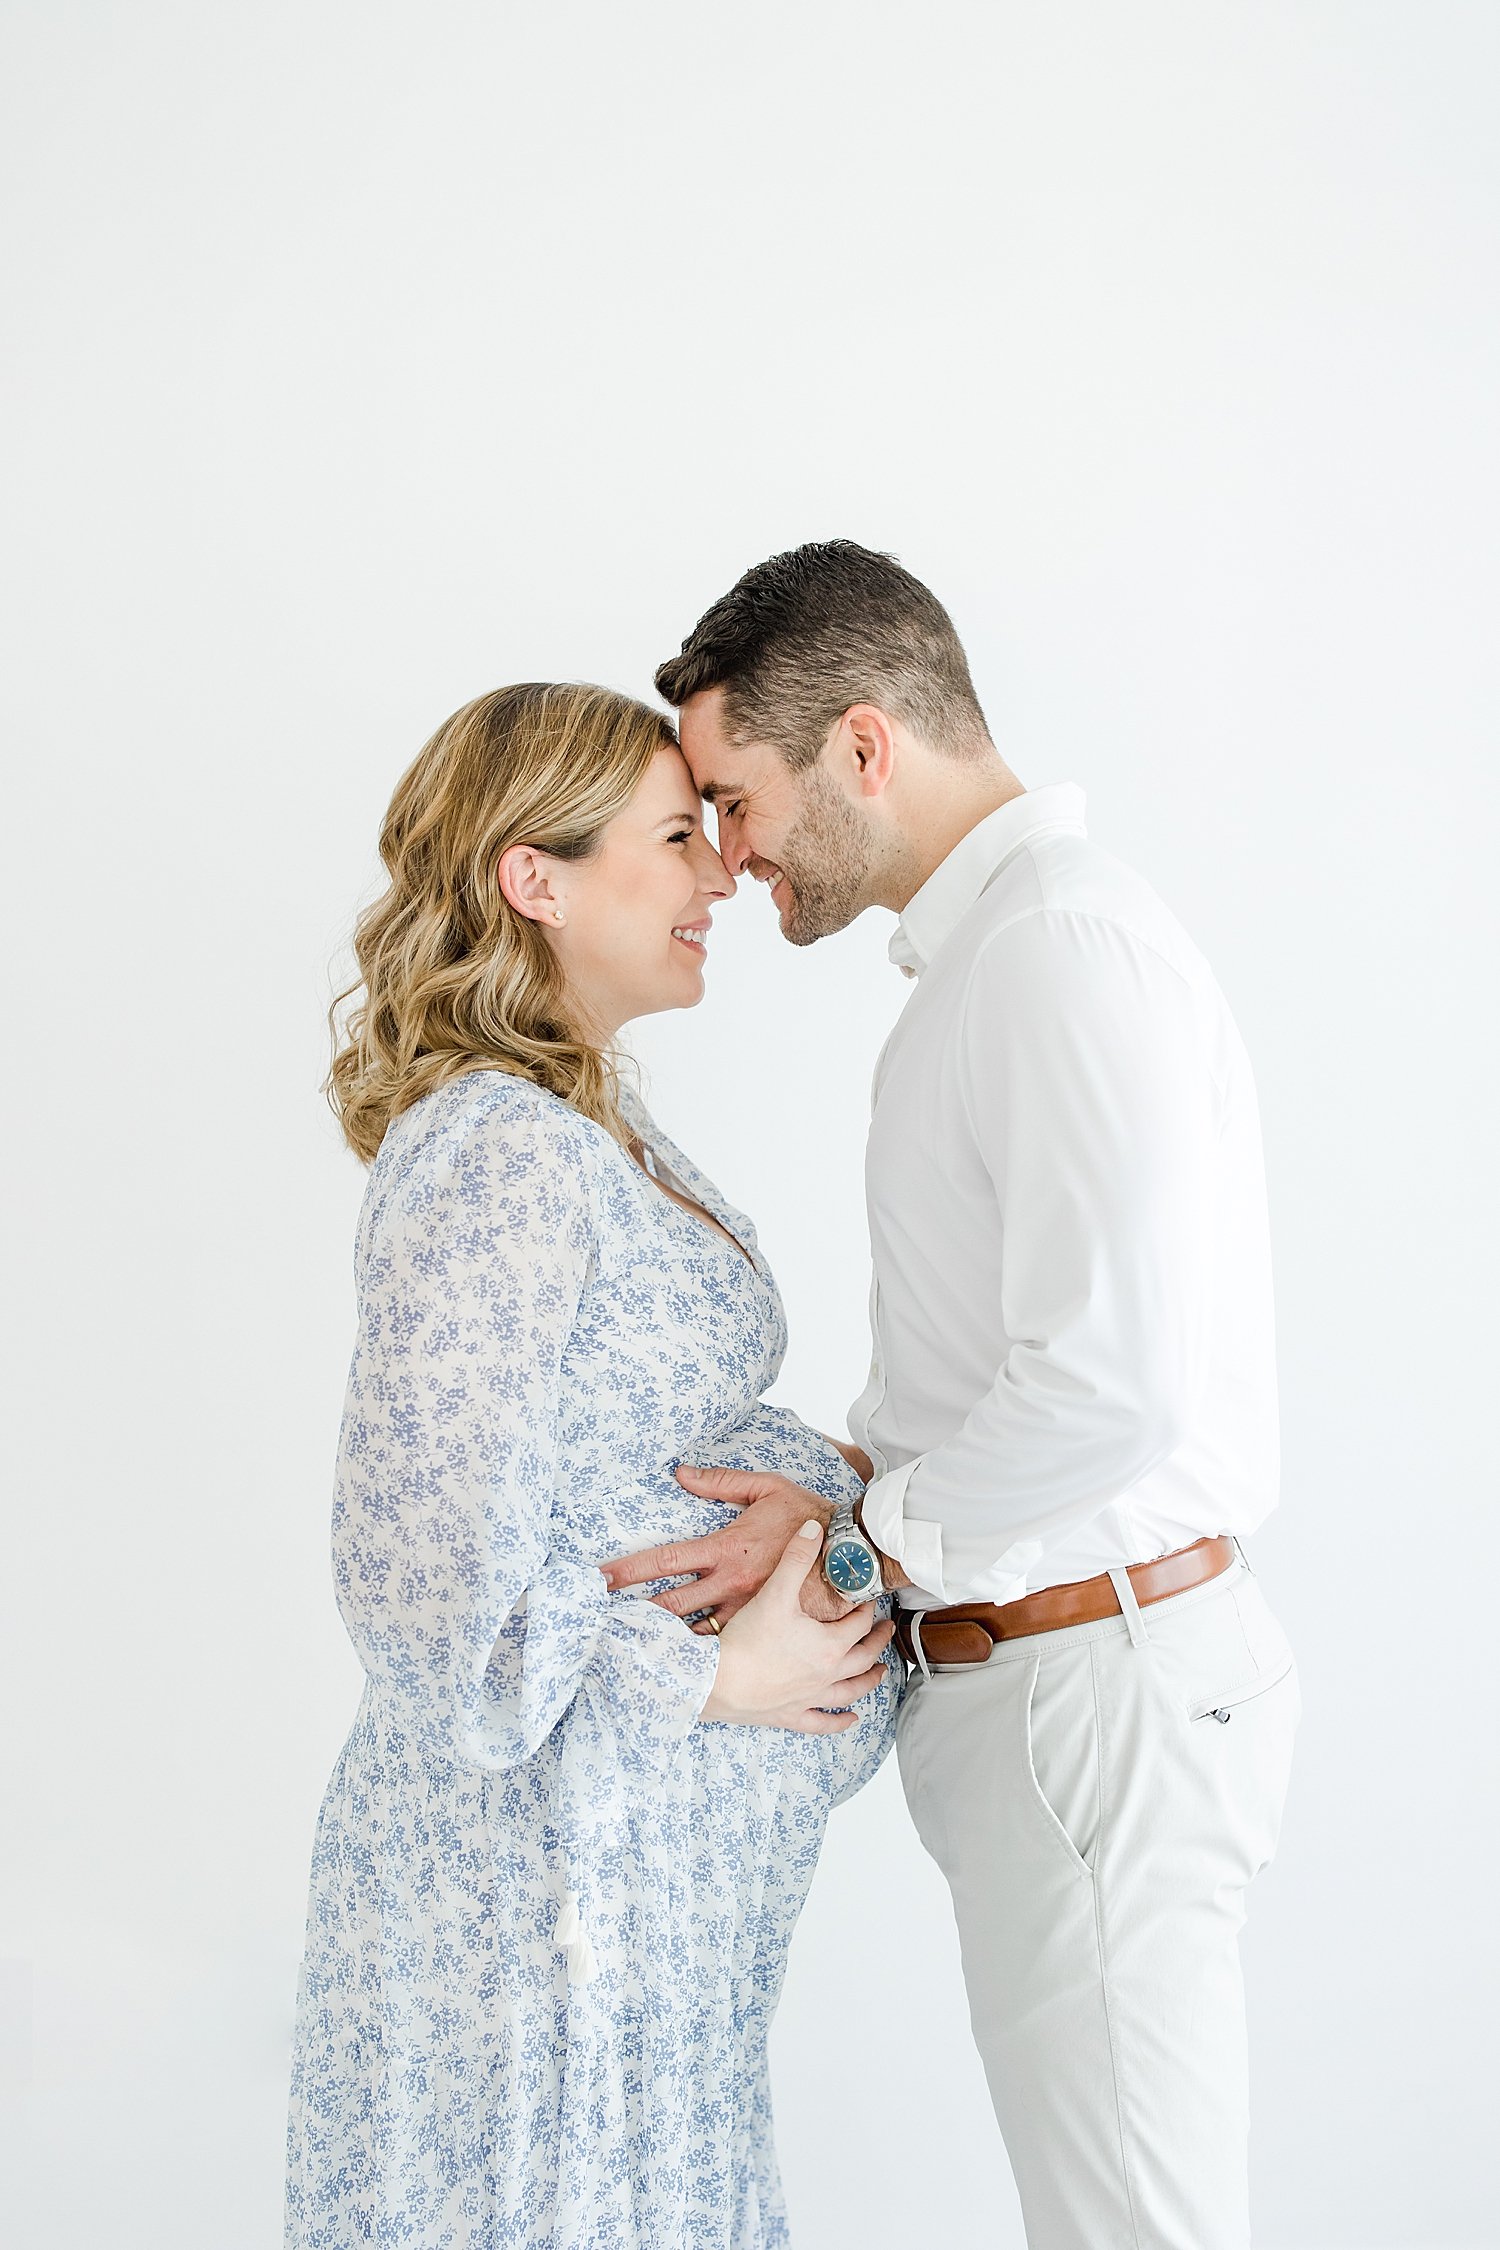 Studio and Sunset Beach Maternity Session With Expecting Parents